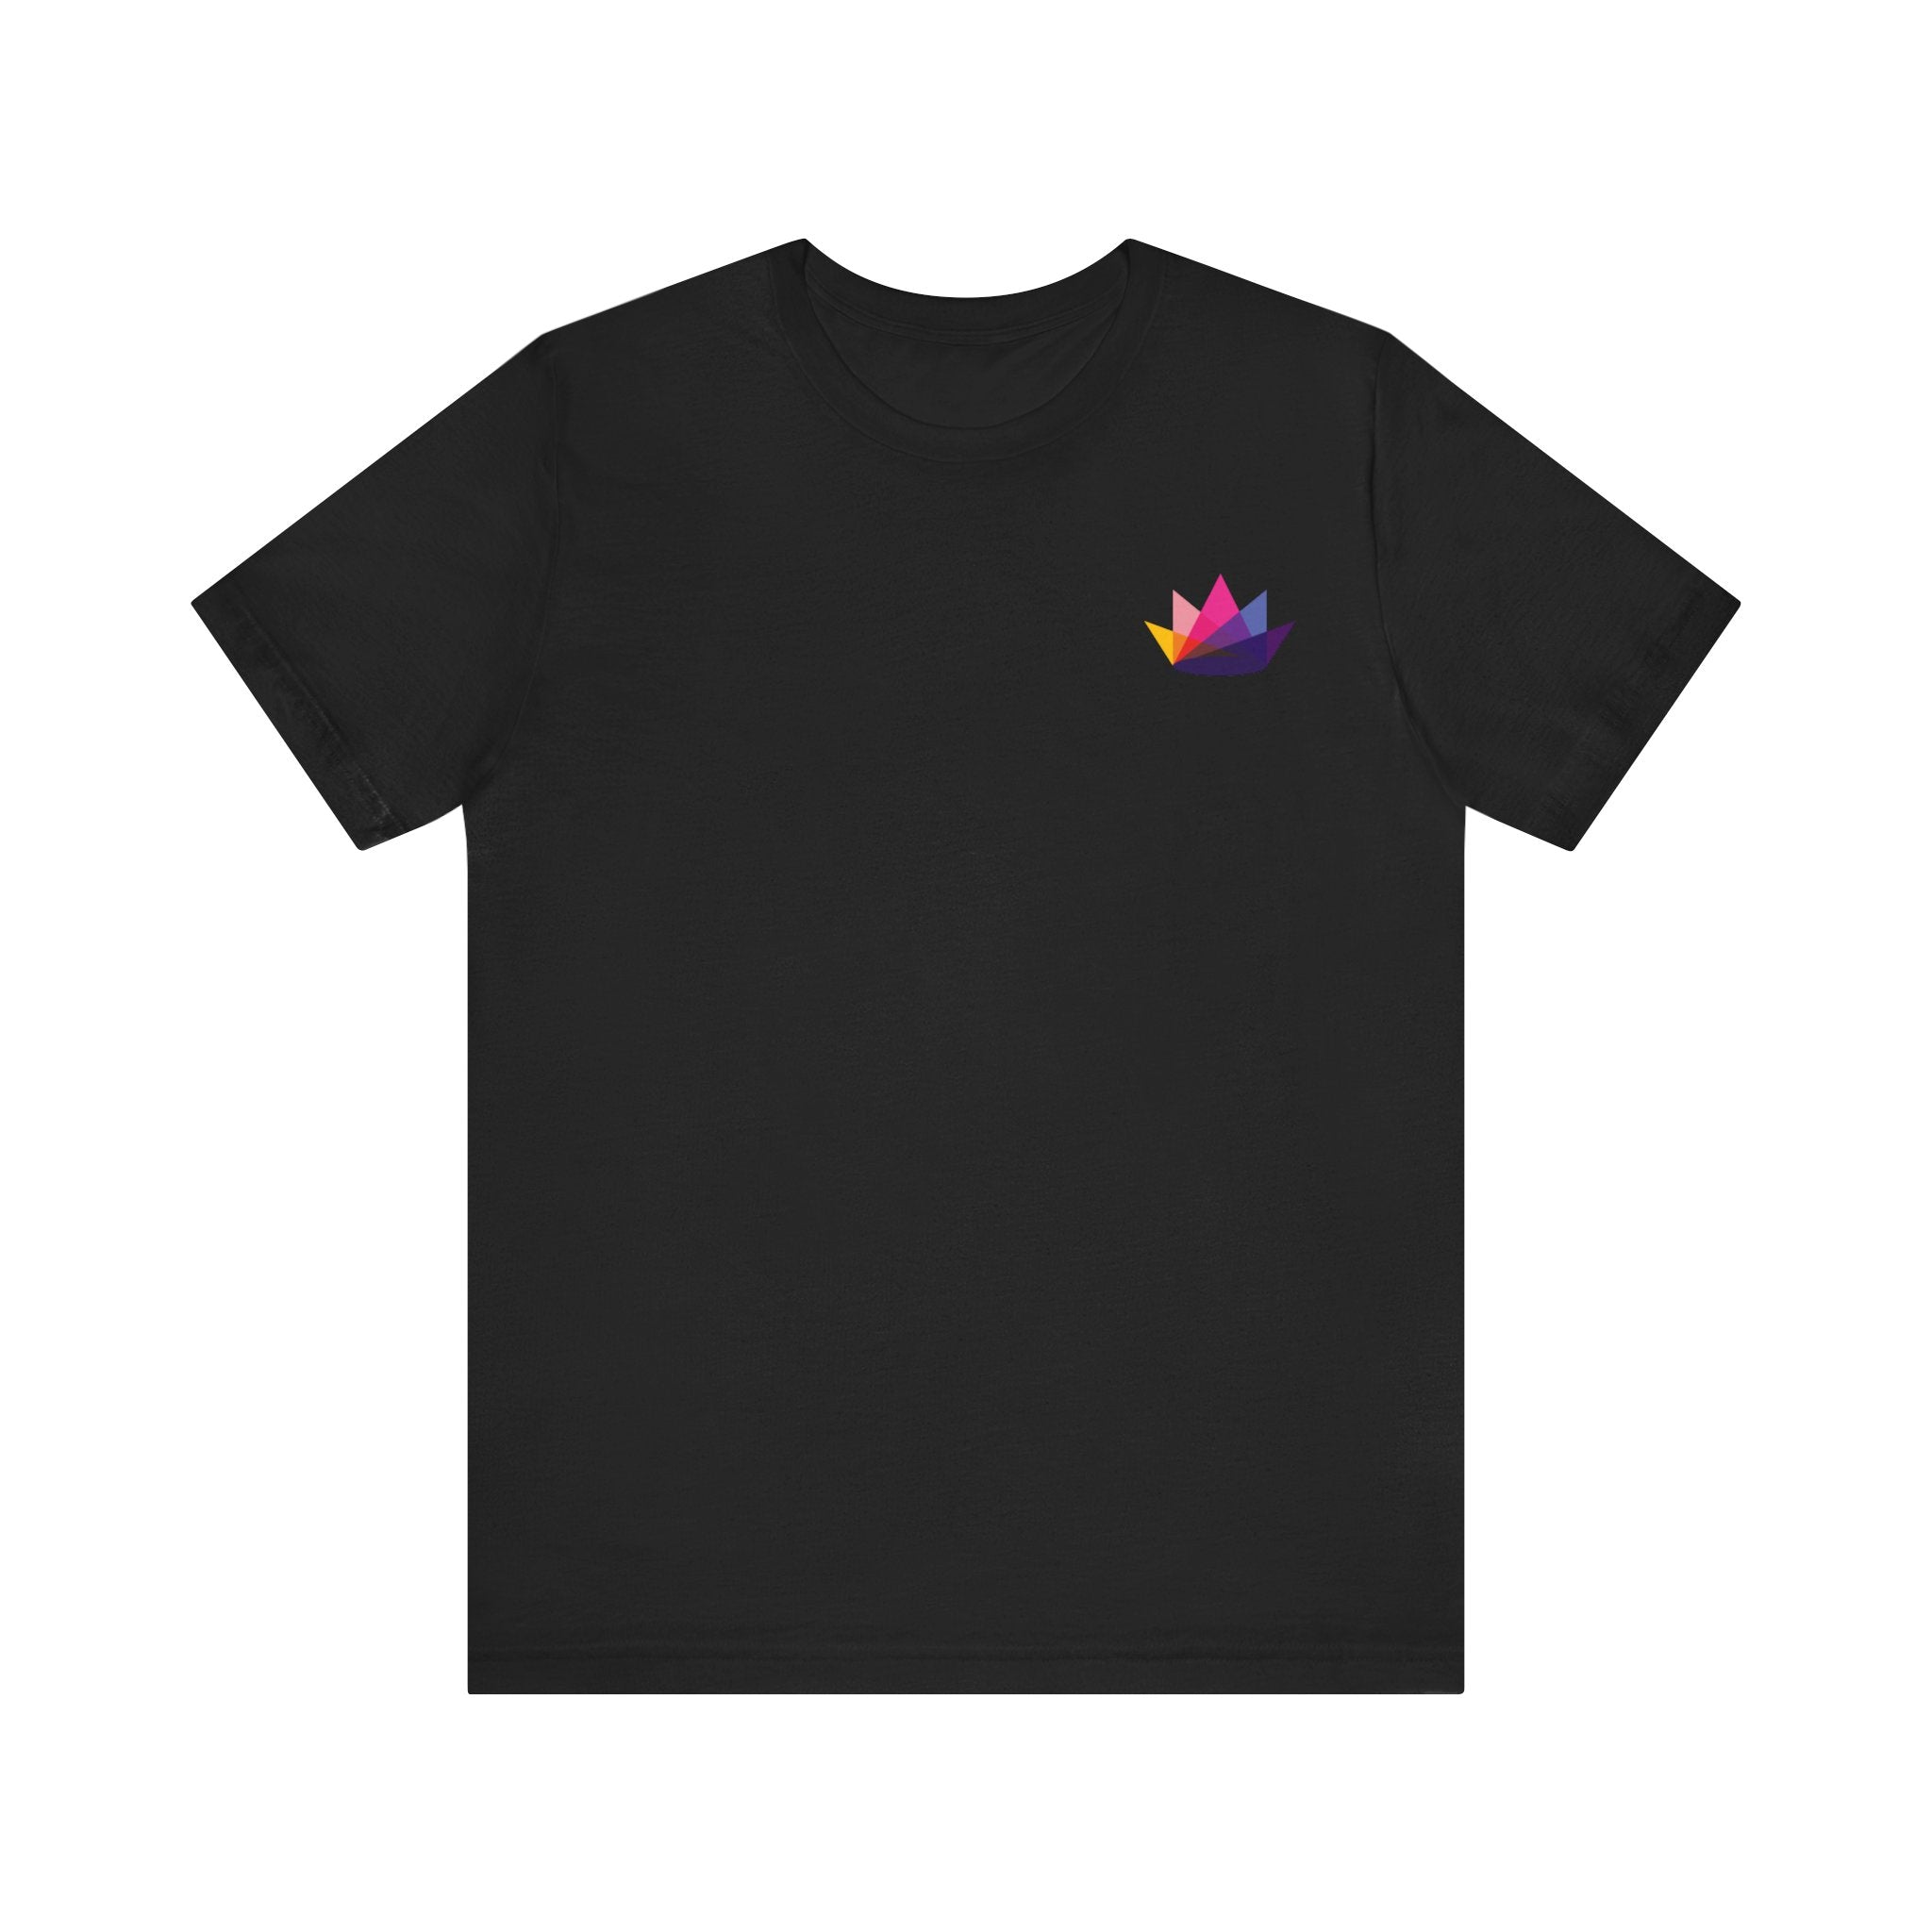 Live Crowns - Jersey Short Sleeve Tee